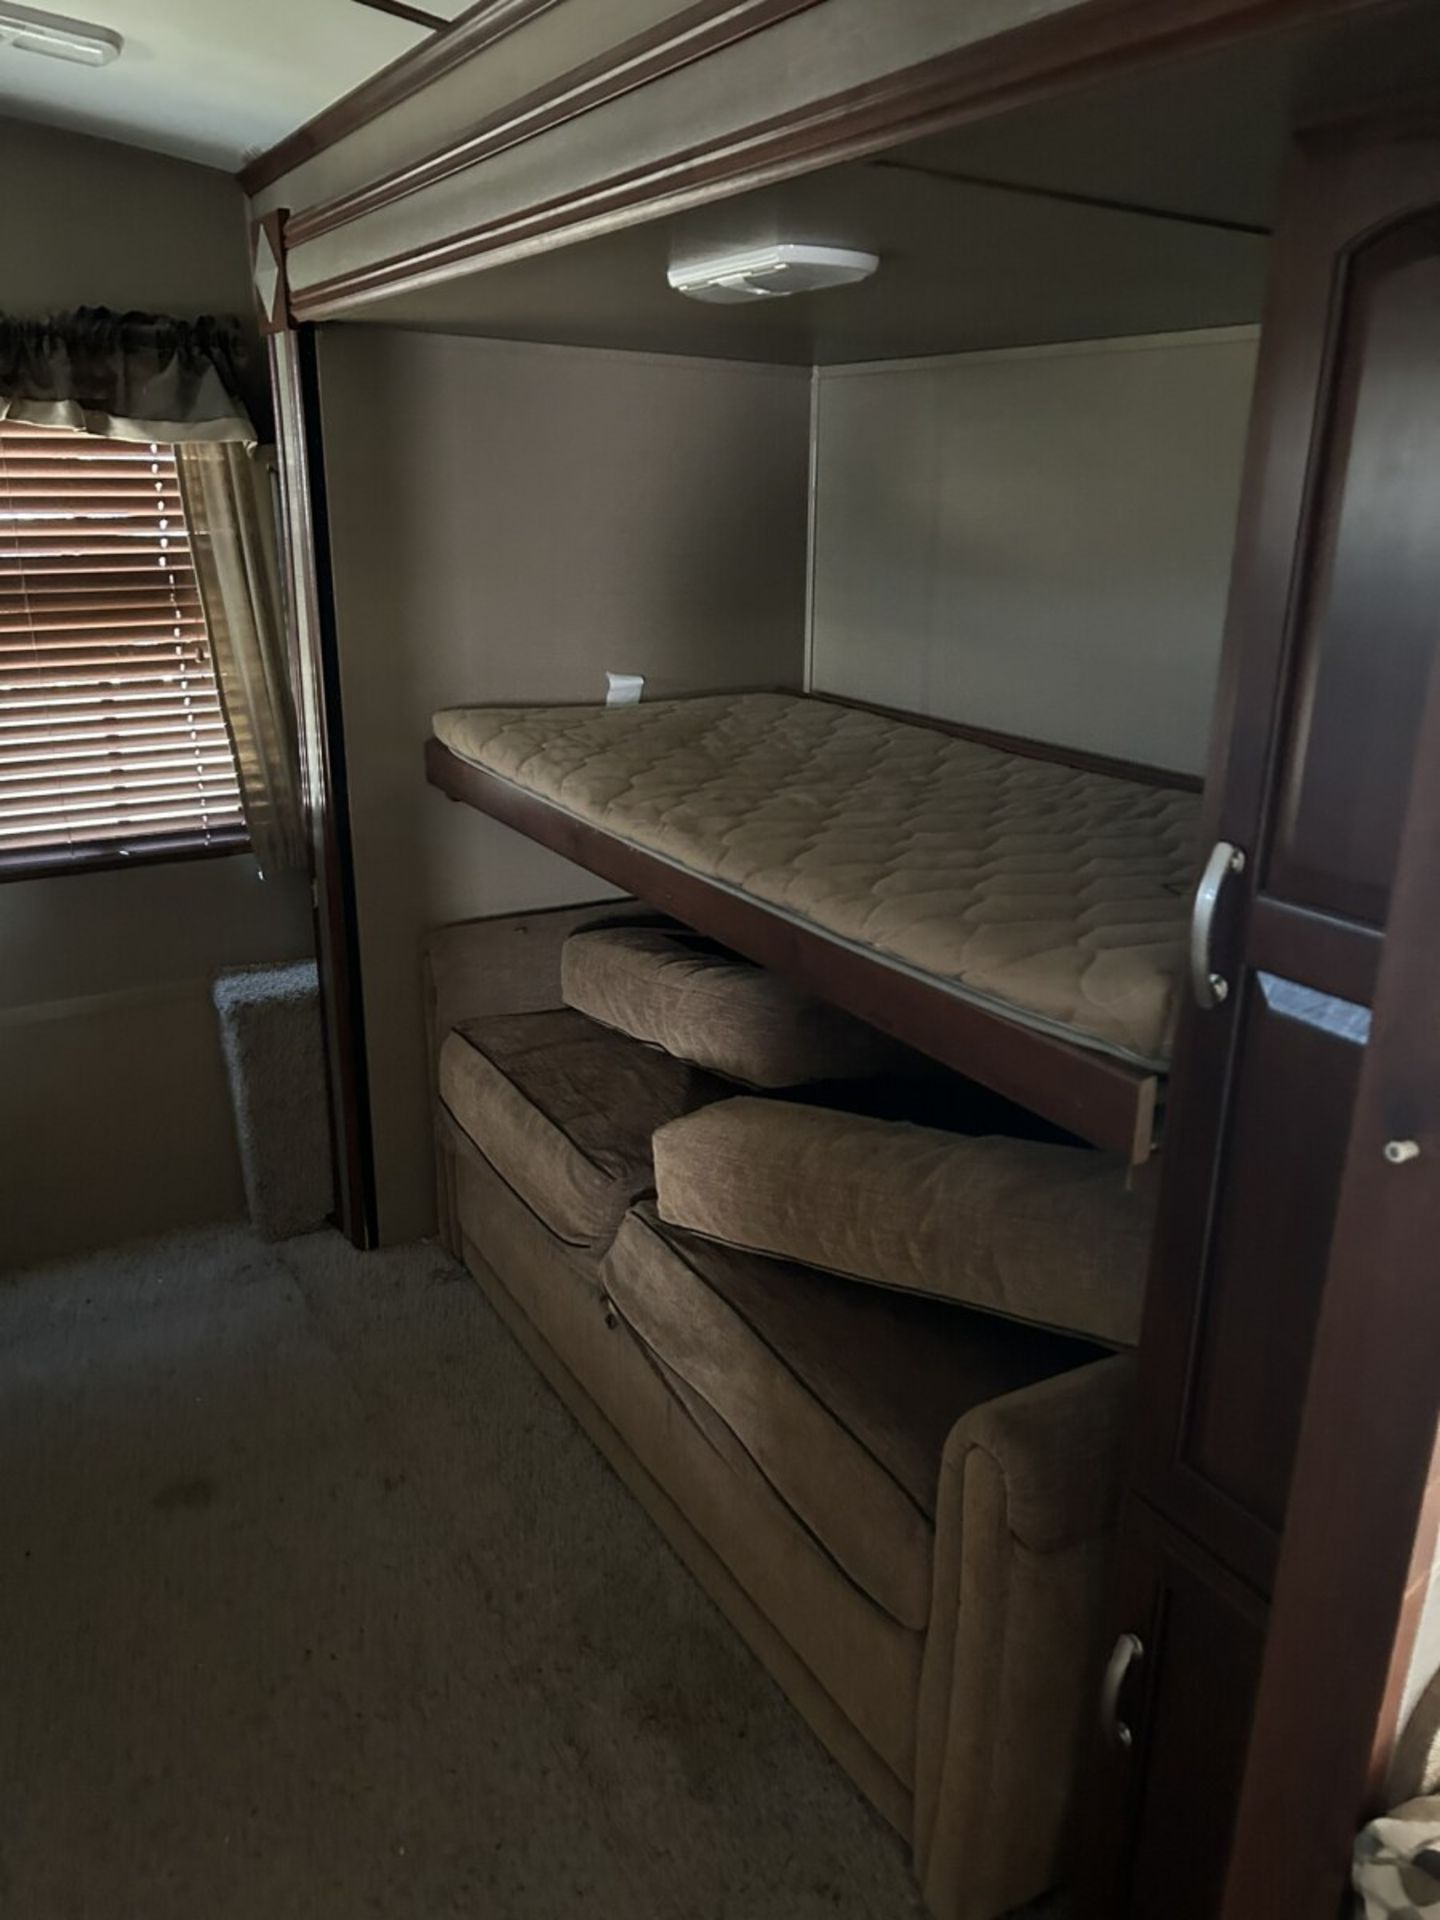 2014 OUTBACK KEYSTONE SUPER-LITE 33 FT HOLIDAY TRAILER, DOUBLE SLIDE, POWER AWNING, OUTDOOR KITCHEN, - Image 6 of 15